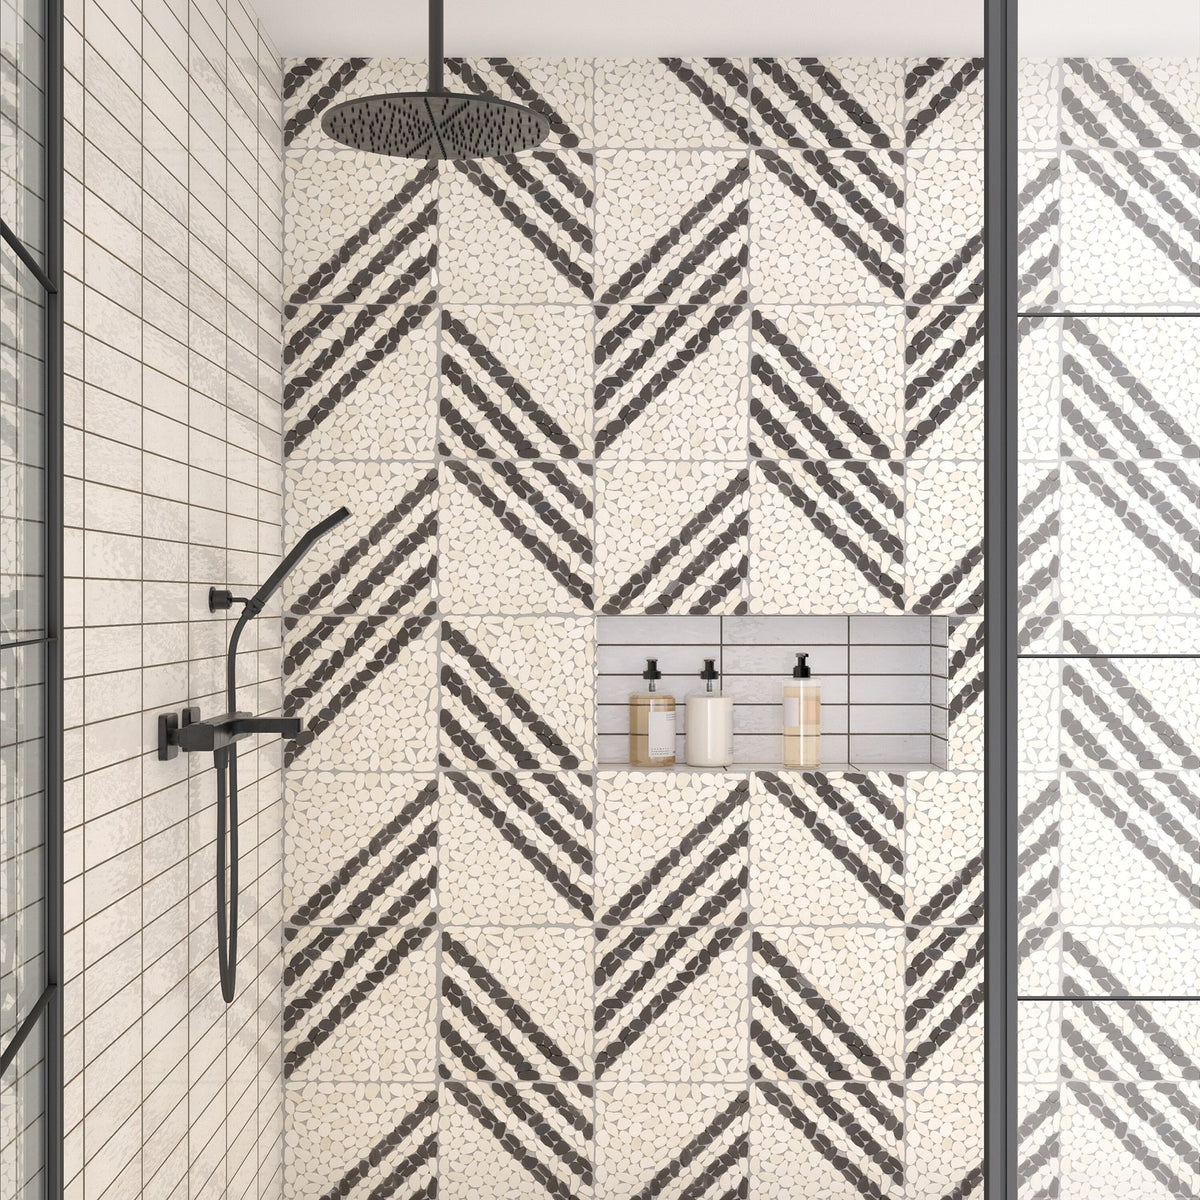 Daltile - Pebble Oasis Natural Stone Mosaic - Striped Pebble - Icicle shower installation